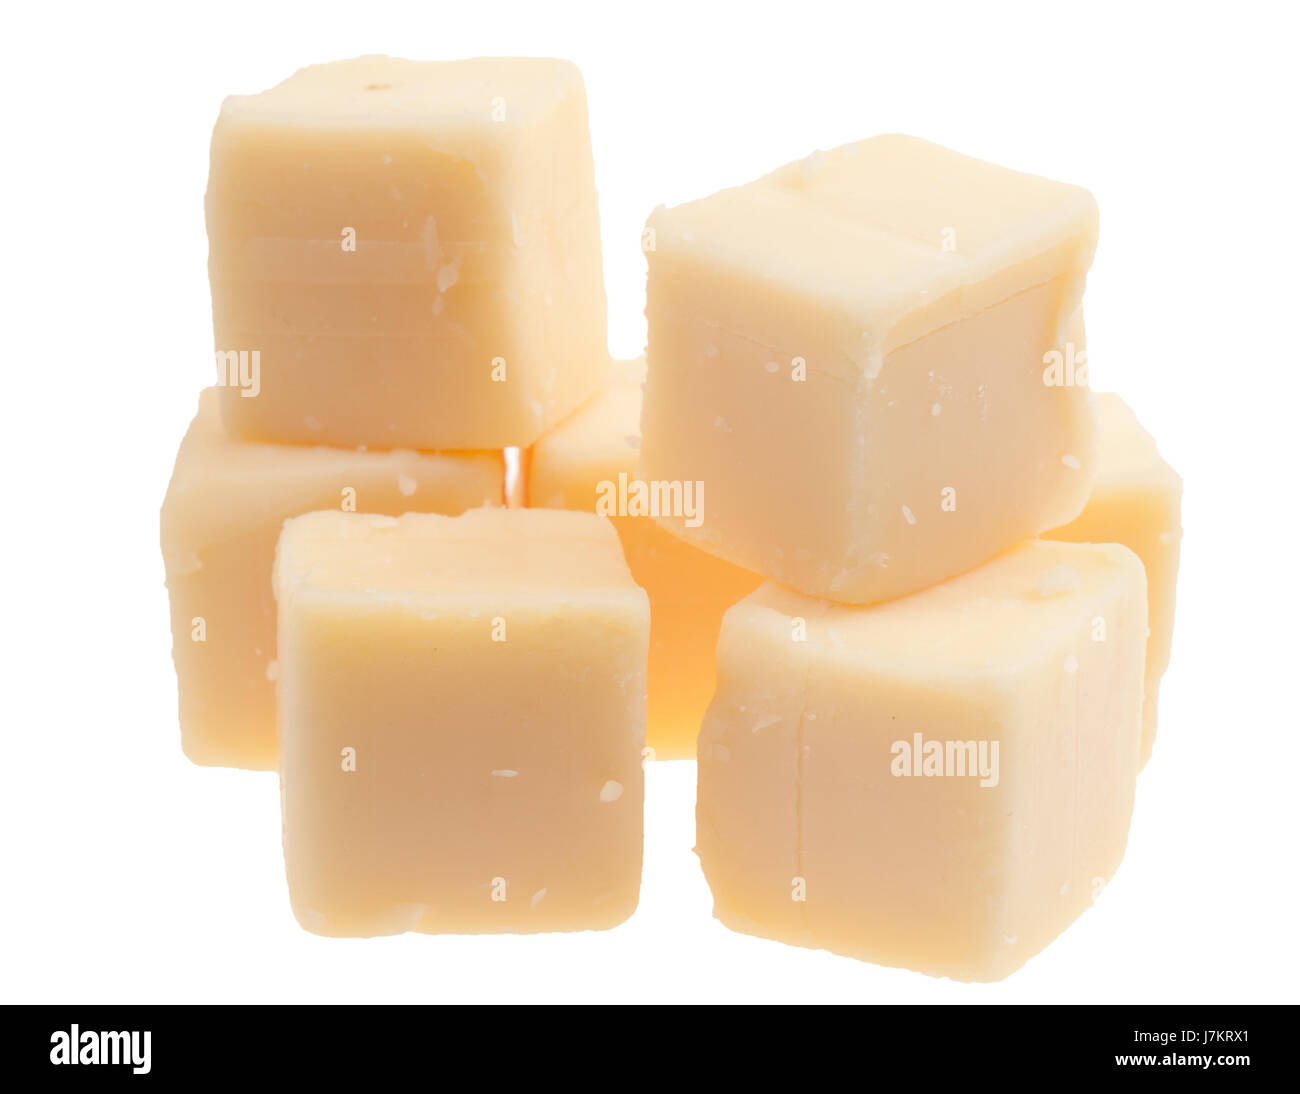 food aliment isolated cheese blocks dutch block snack white food aliment object Stock Photo